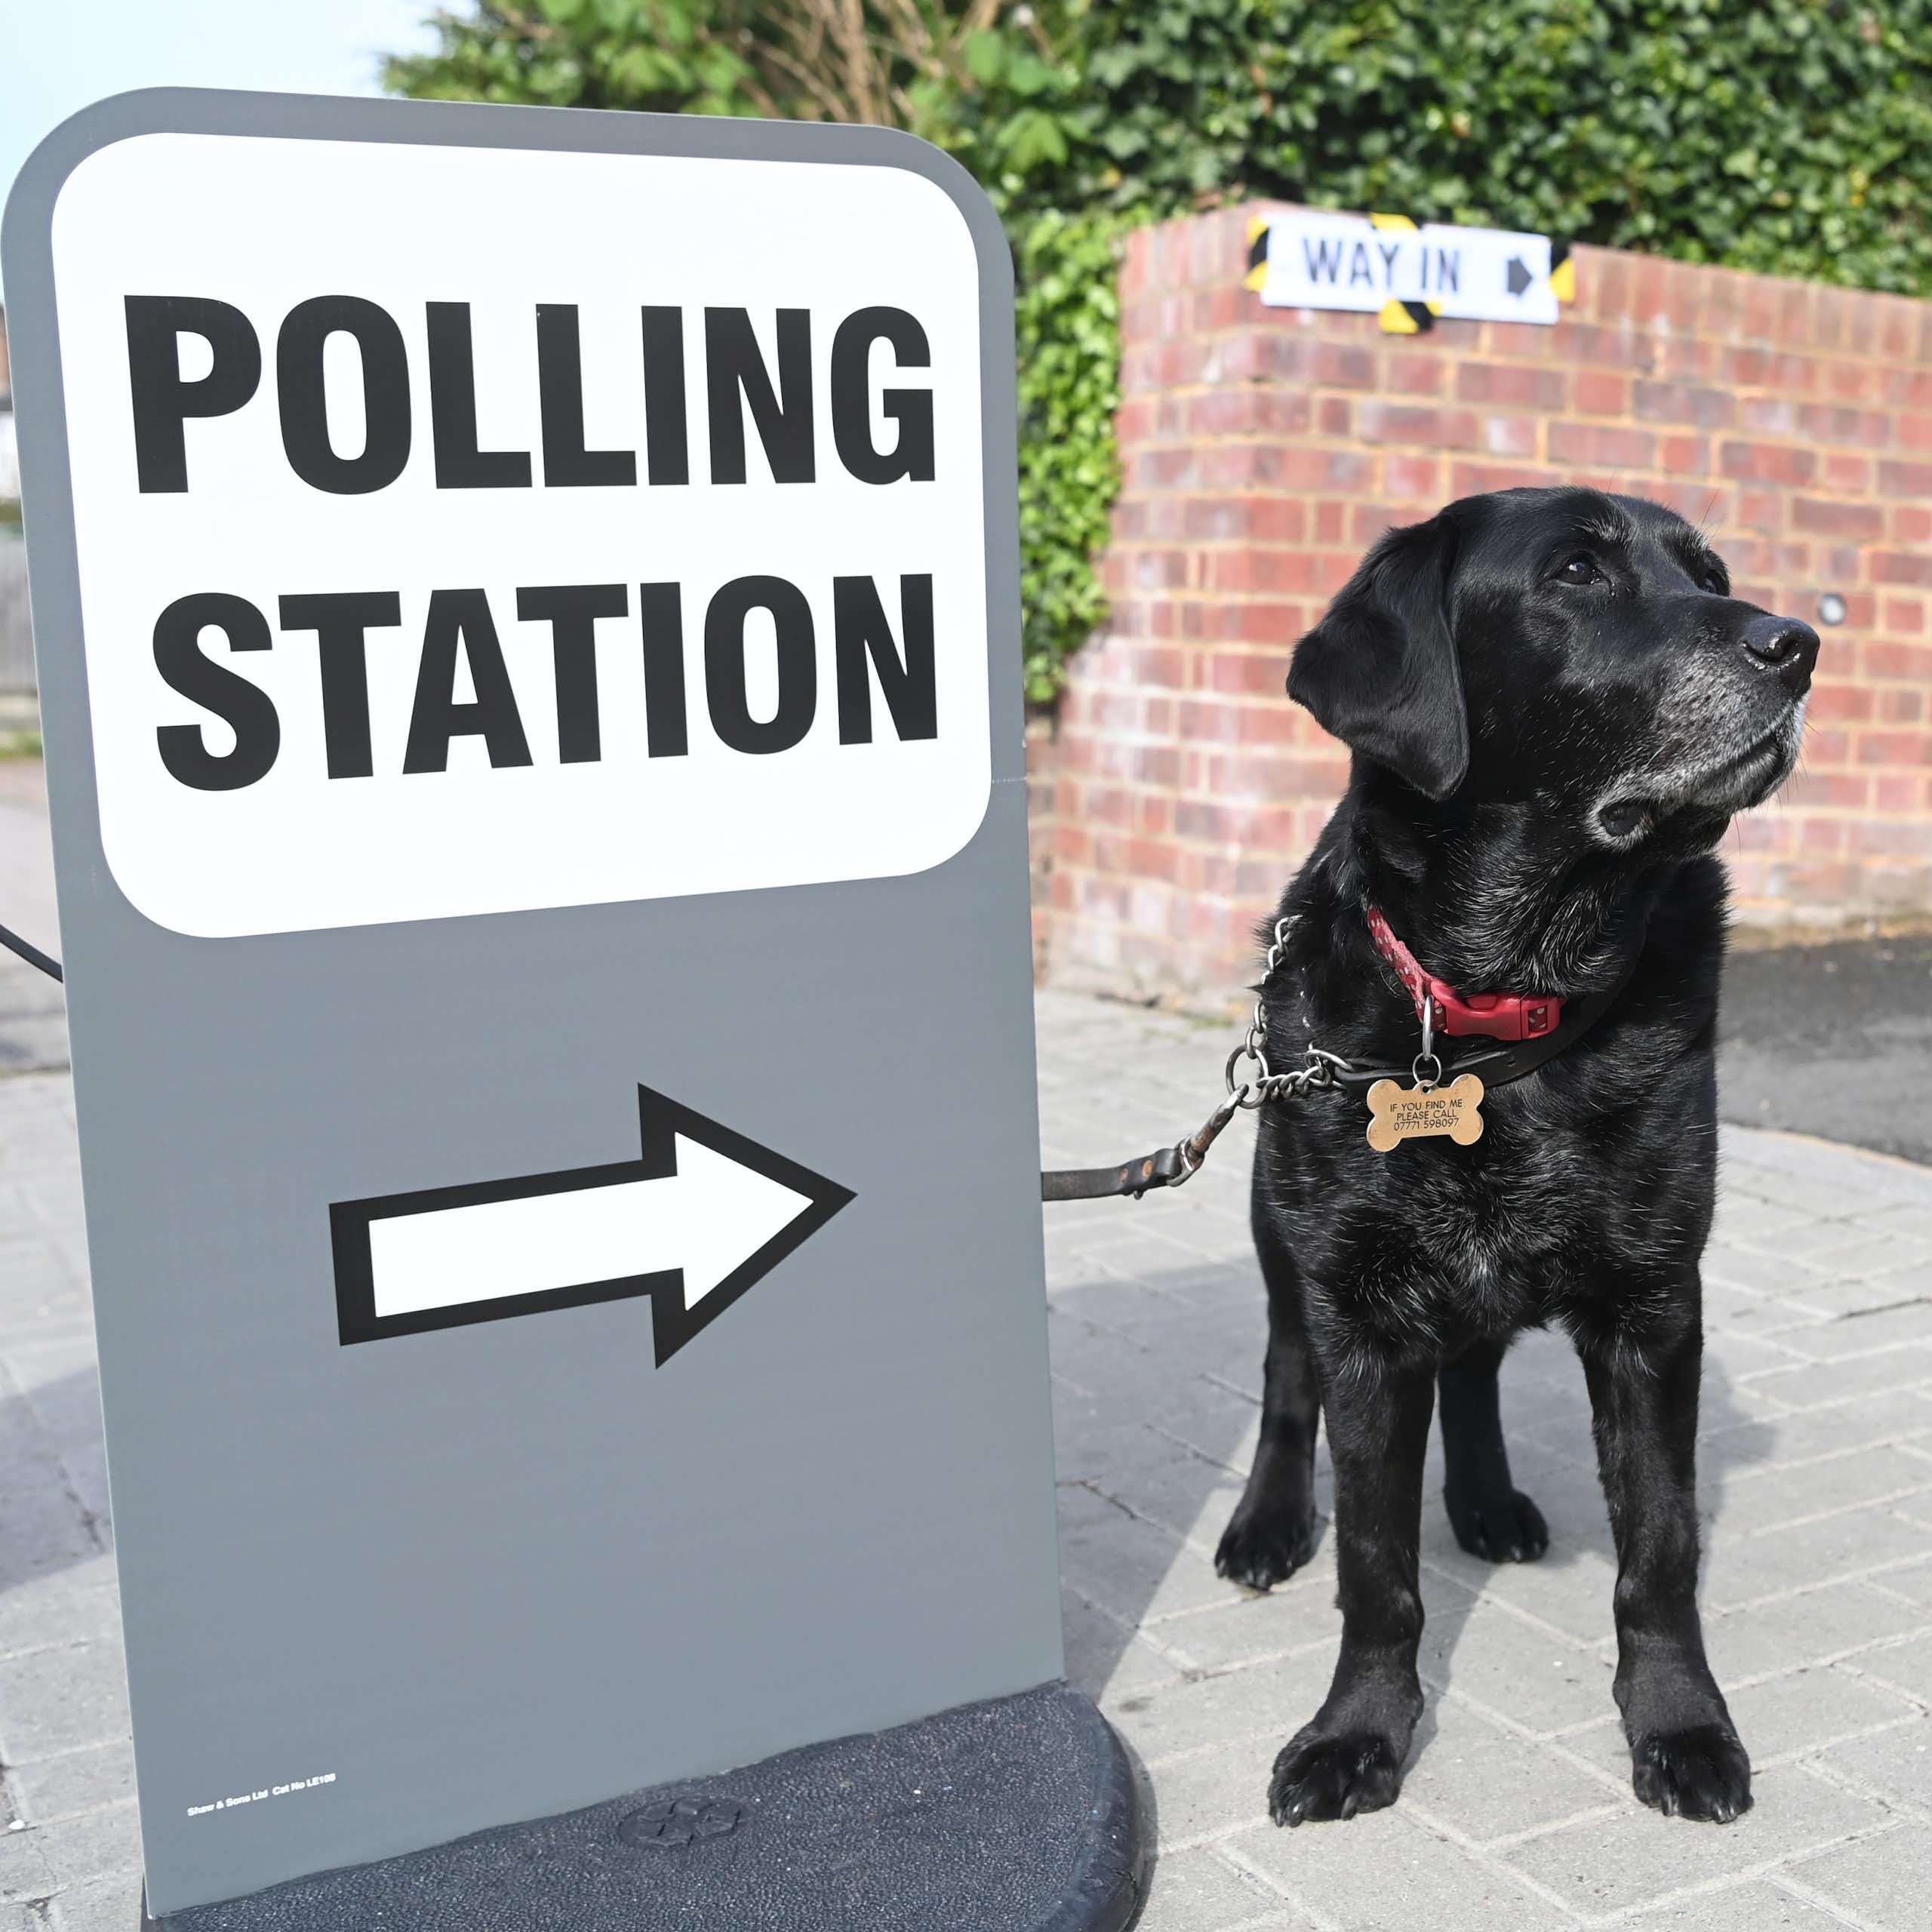 A dog next to a sign for a polling station.